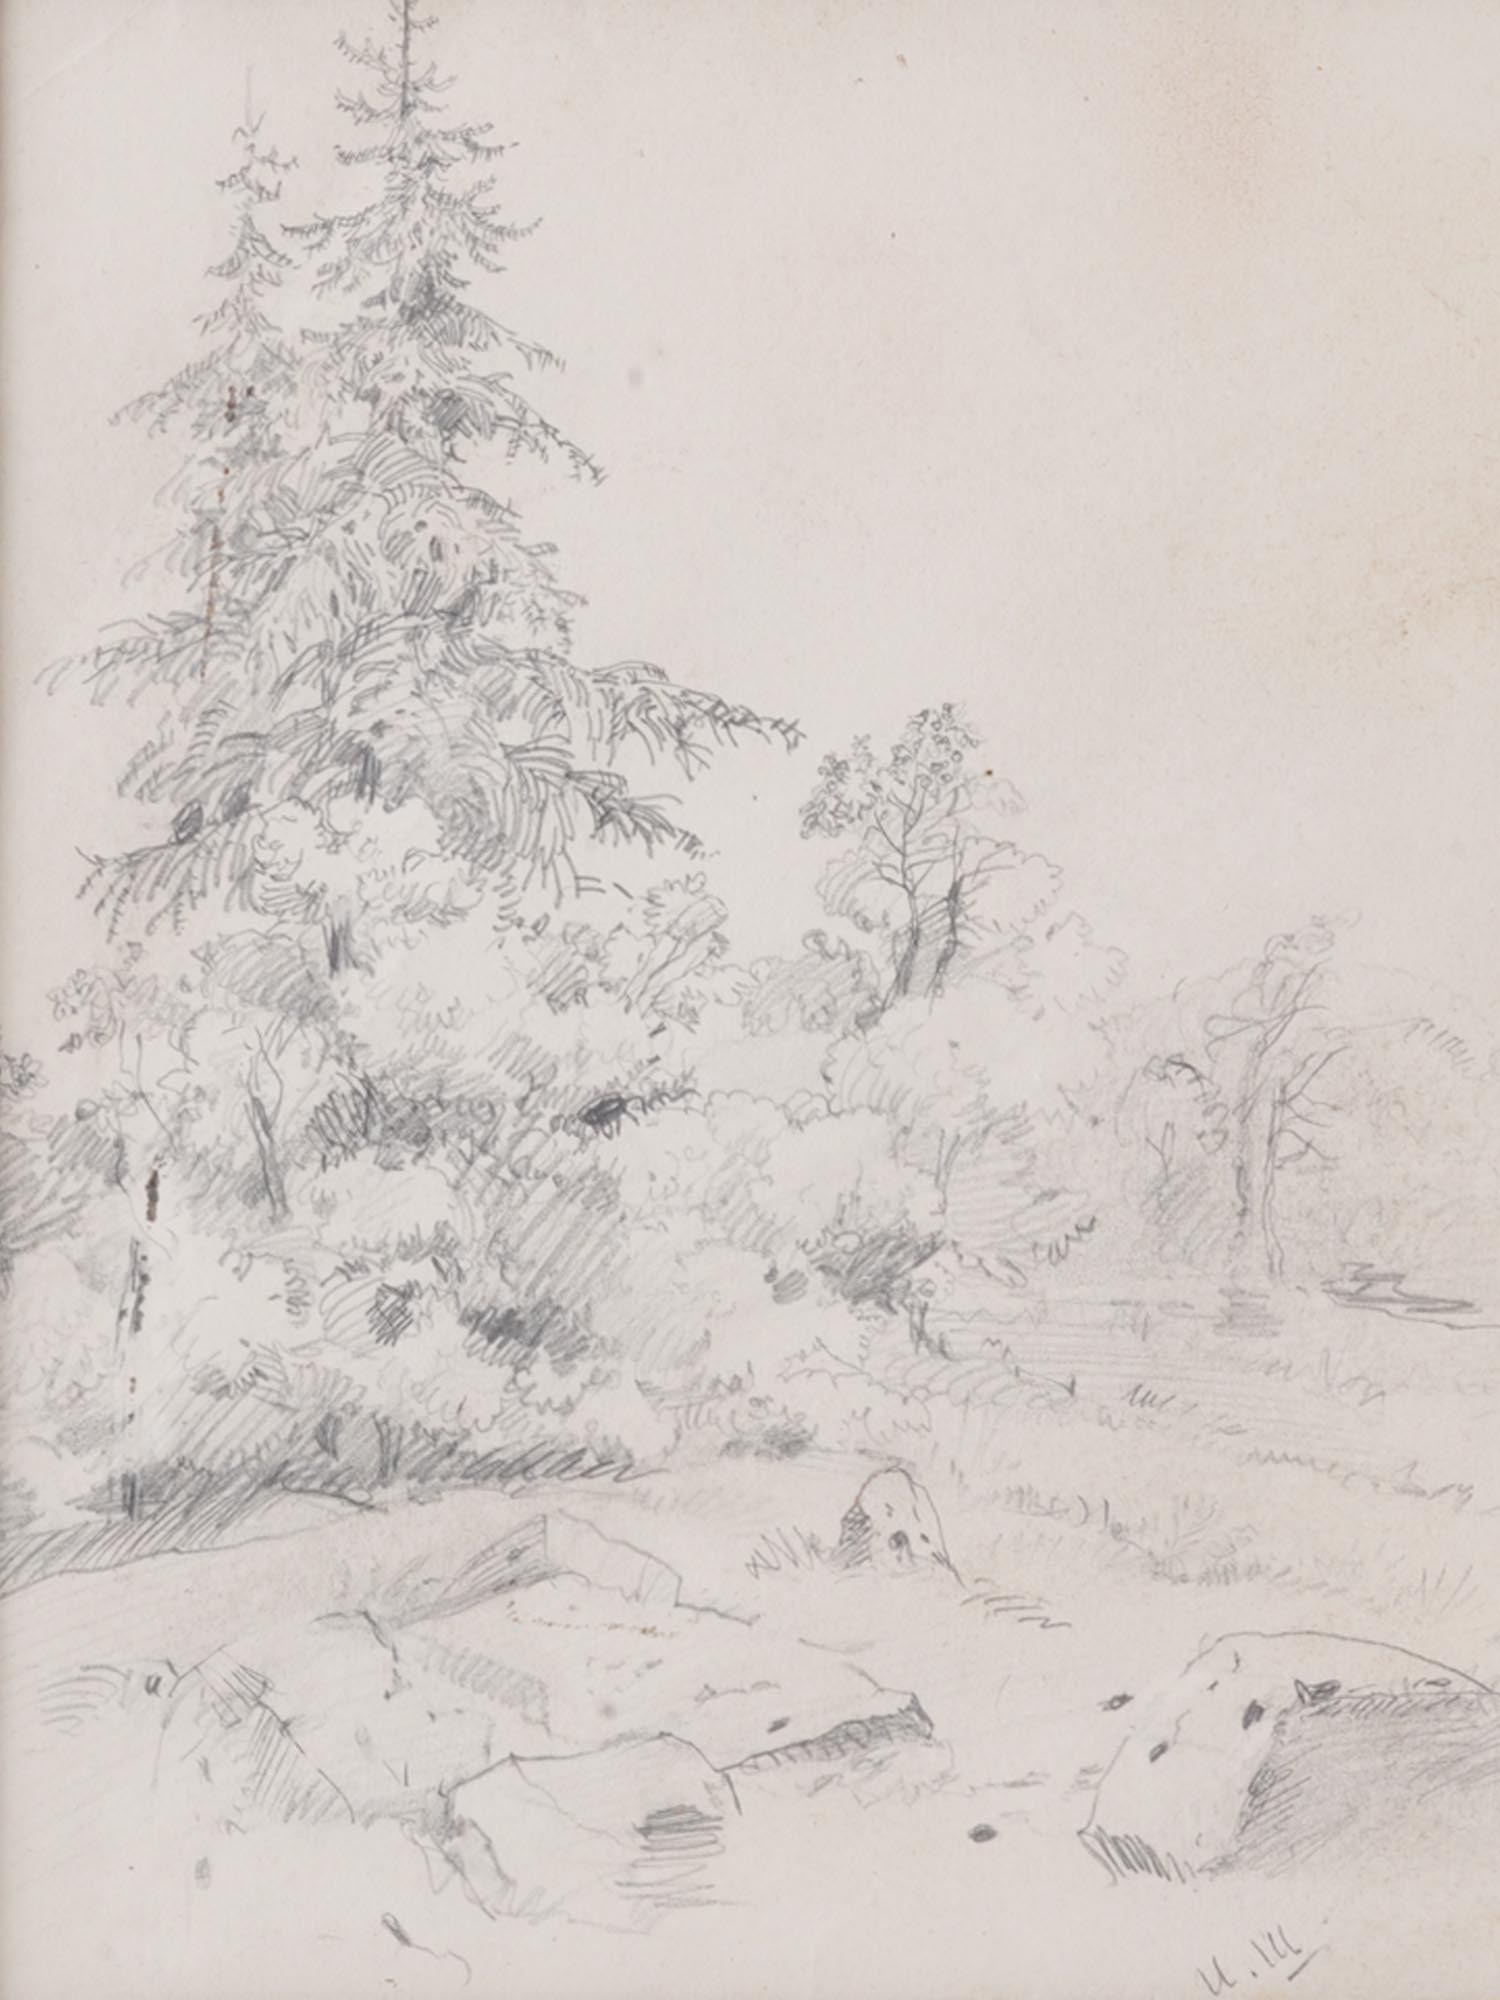 RUSSIAN LANDSCAPE PENCIL PAINTING BY IVAN SHISHKIN PIC-1